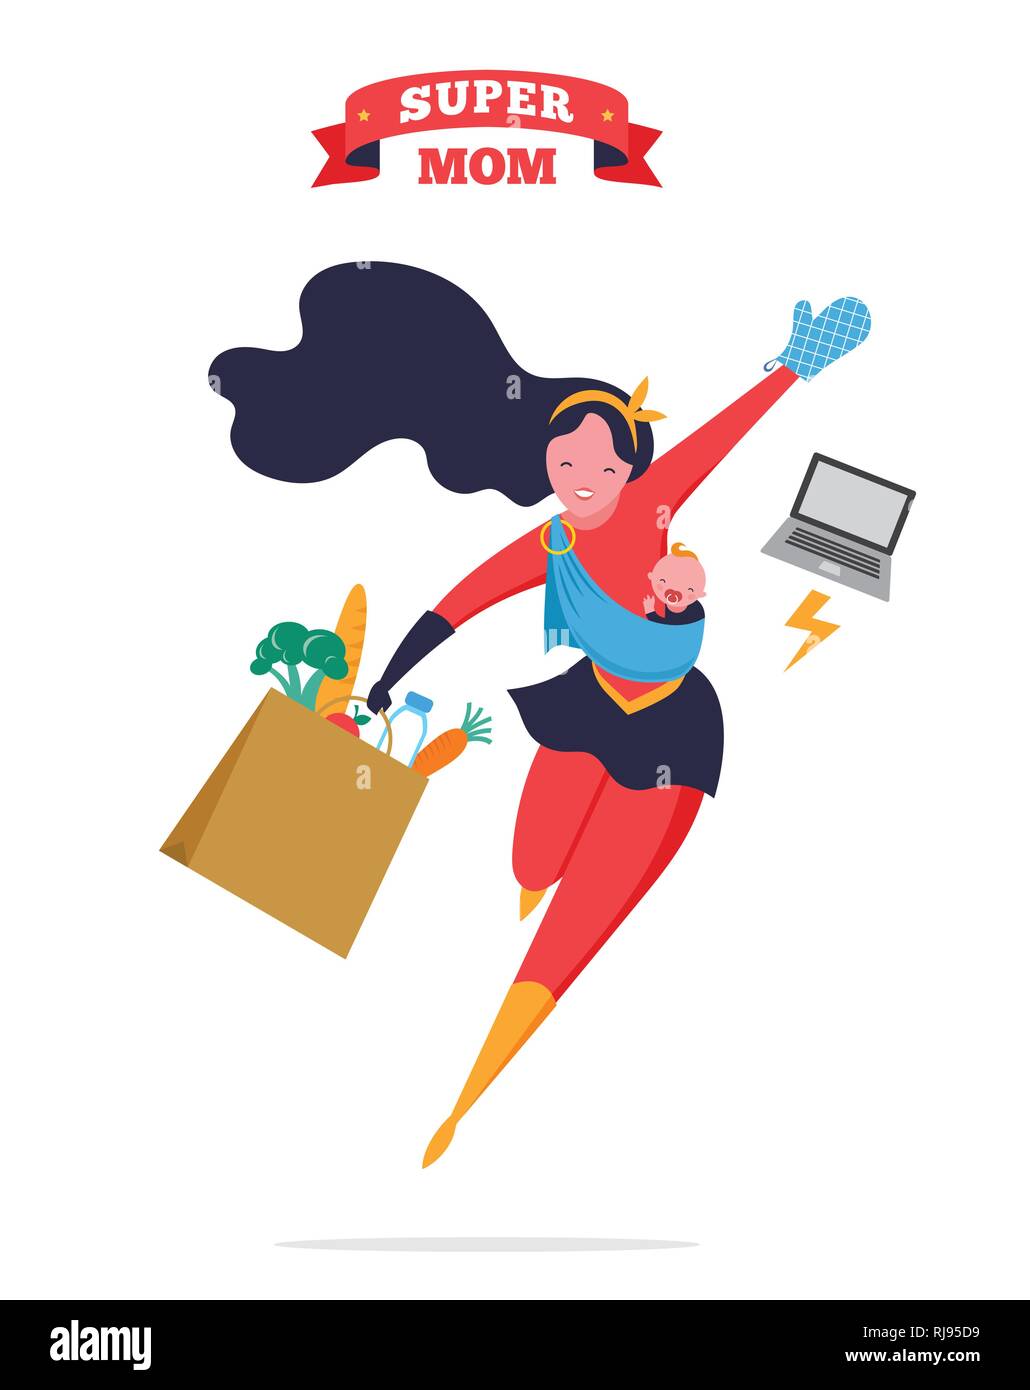 Super Mom. Flying superhero mother carrying a baby. Vector illustration Stock Vector